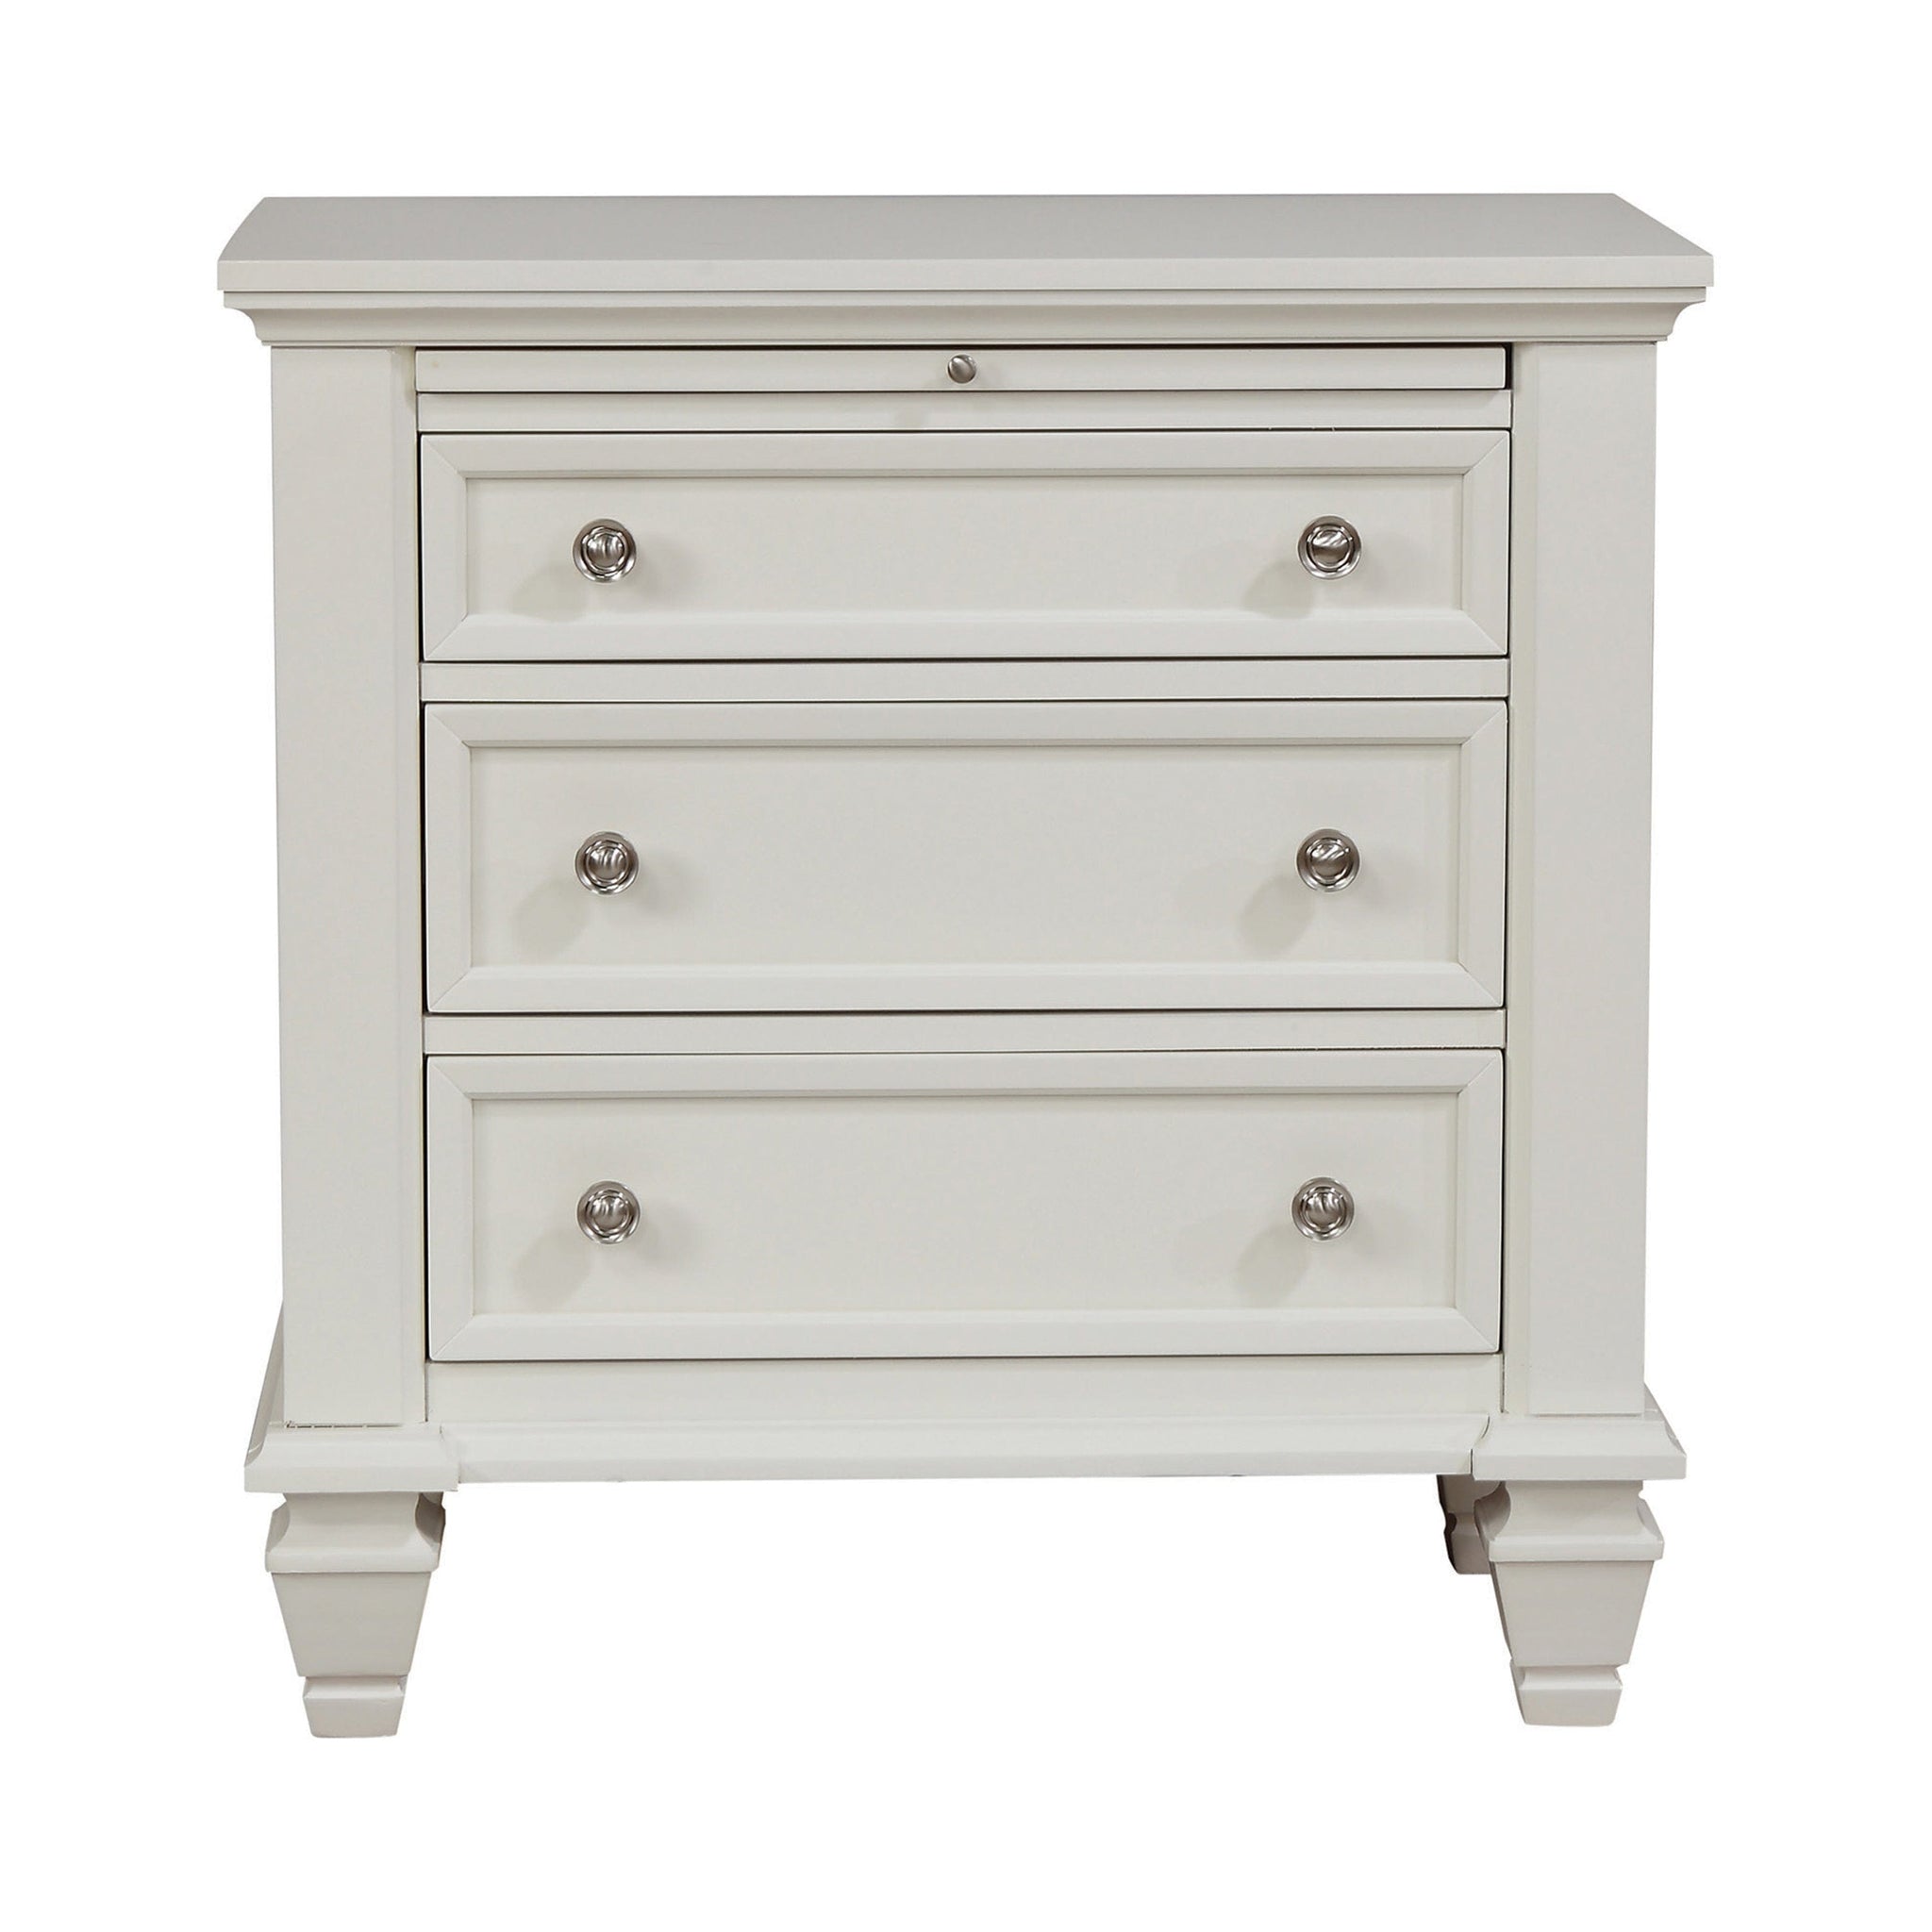 Sandy Beach 3-Drawer Nightstand White Collection: Fashionable, Functional, And Durable, This Nightstand Has It All. Three Roomy Drawers Offer Lots Of Space For Personal Storage.  SKU: 201302